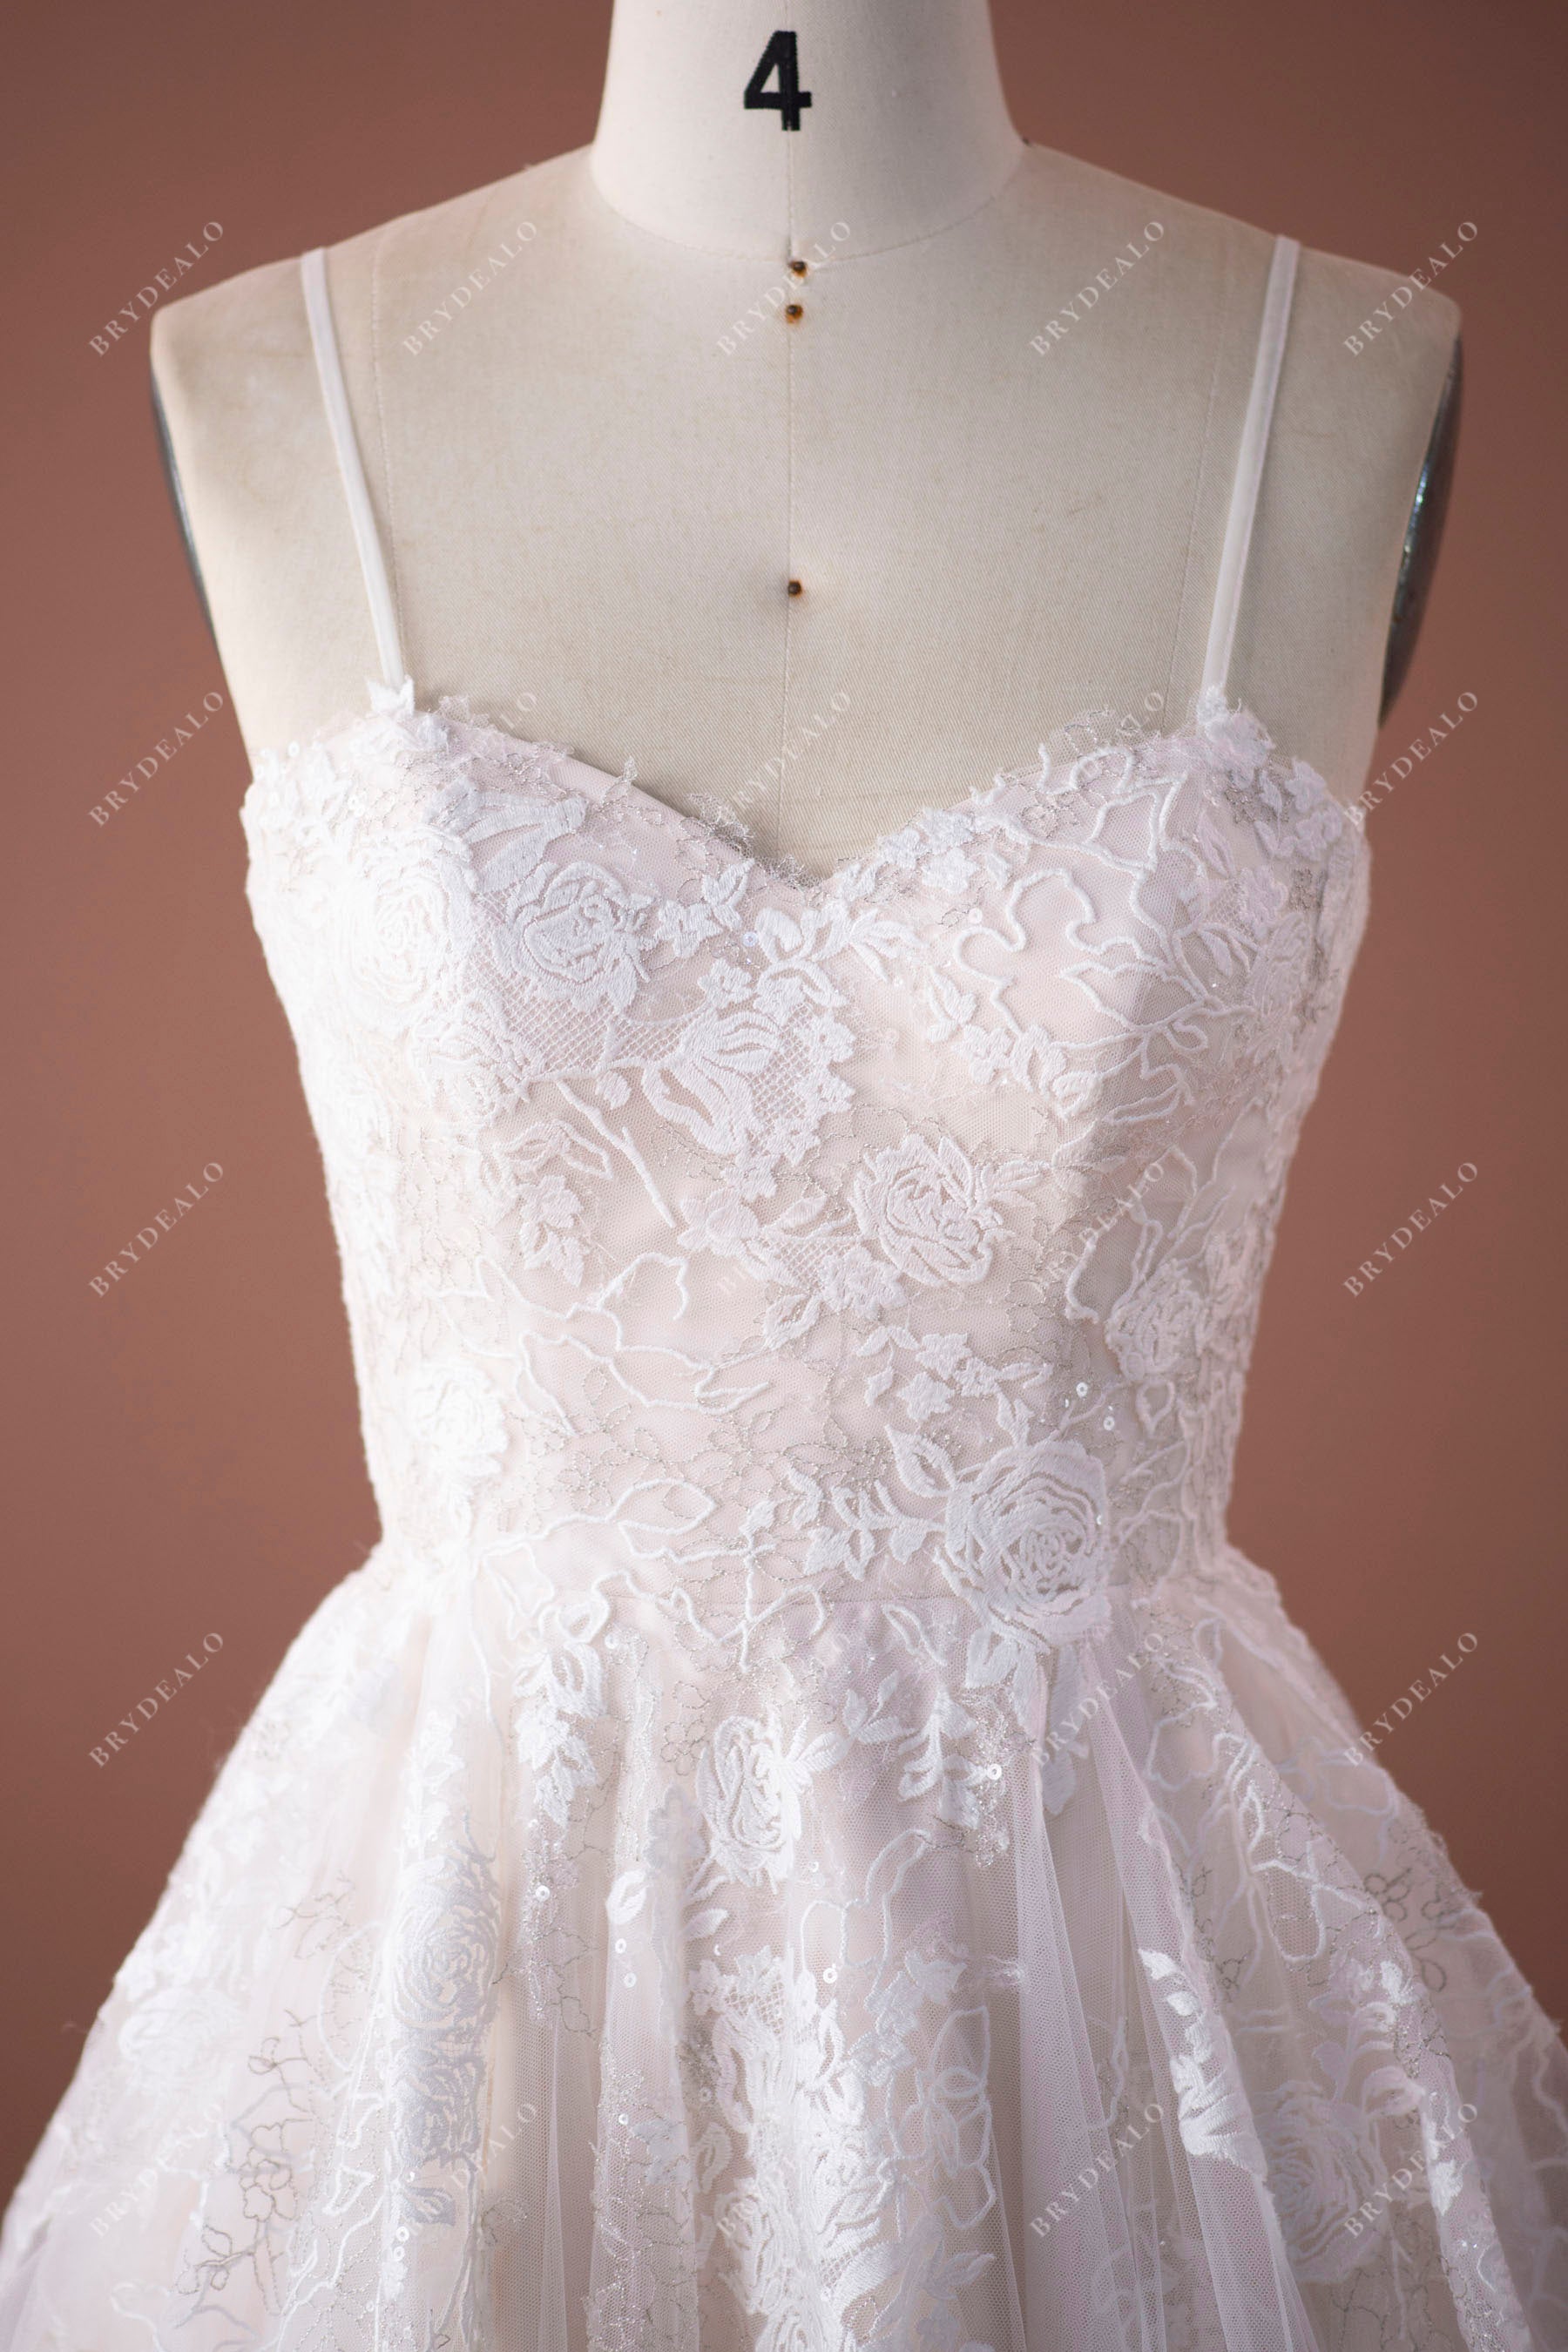 Thin Straps Lace Tulle Flounce A-line Wedding Dress